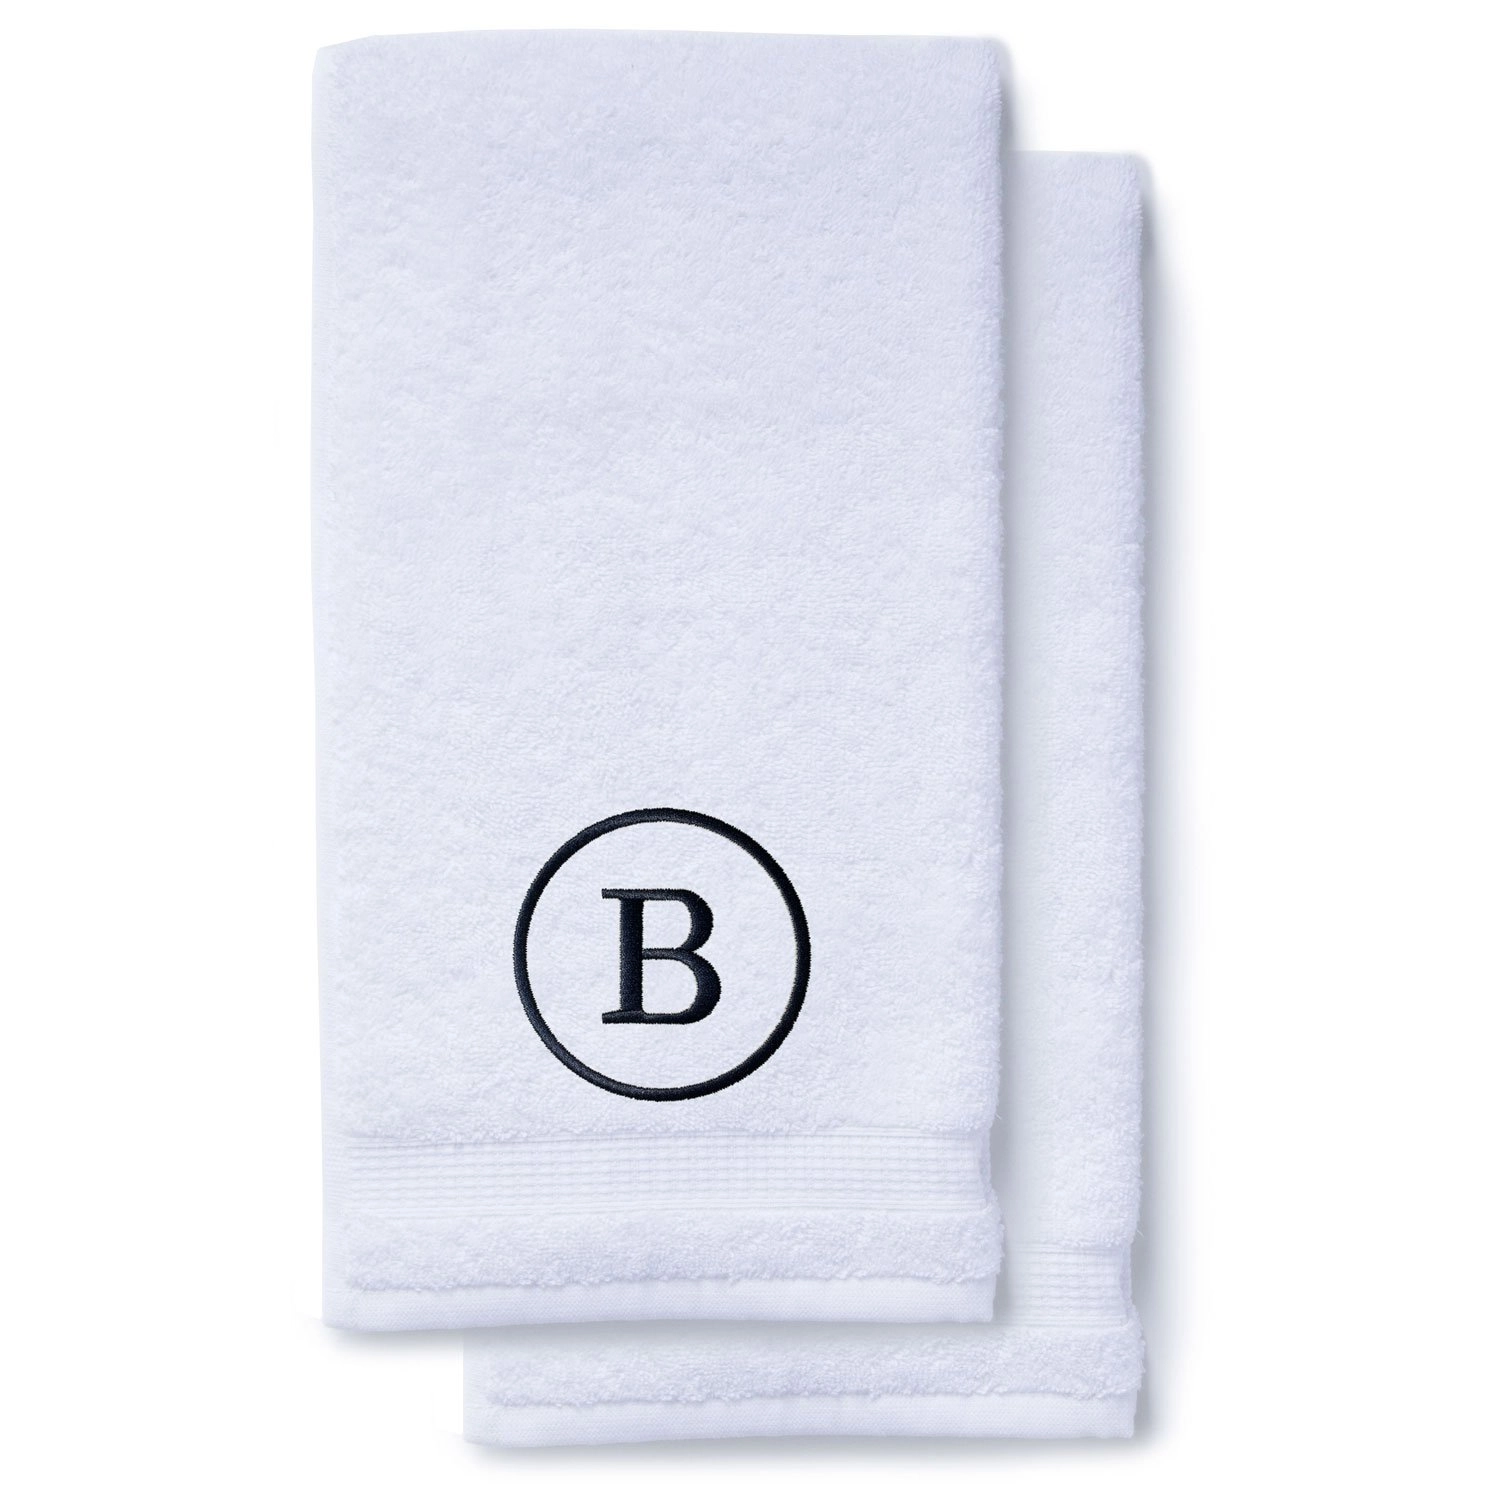 http://robemart.com/images/thumbnails/detailed/7/B-Navy-stacked-Monogrammed-Hand-Towels.webp